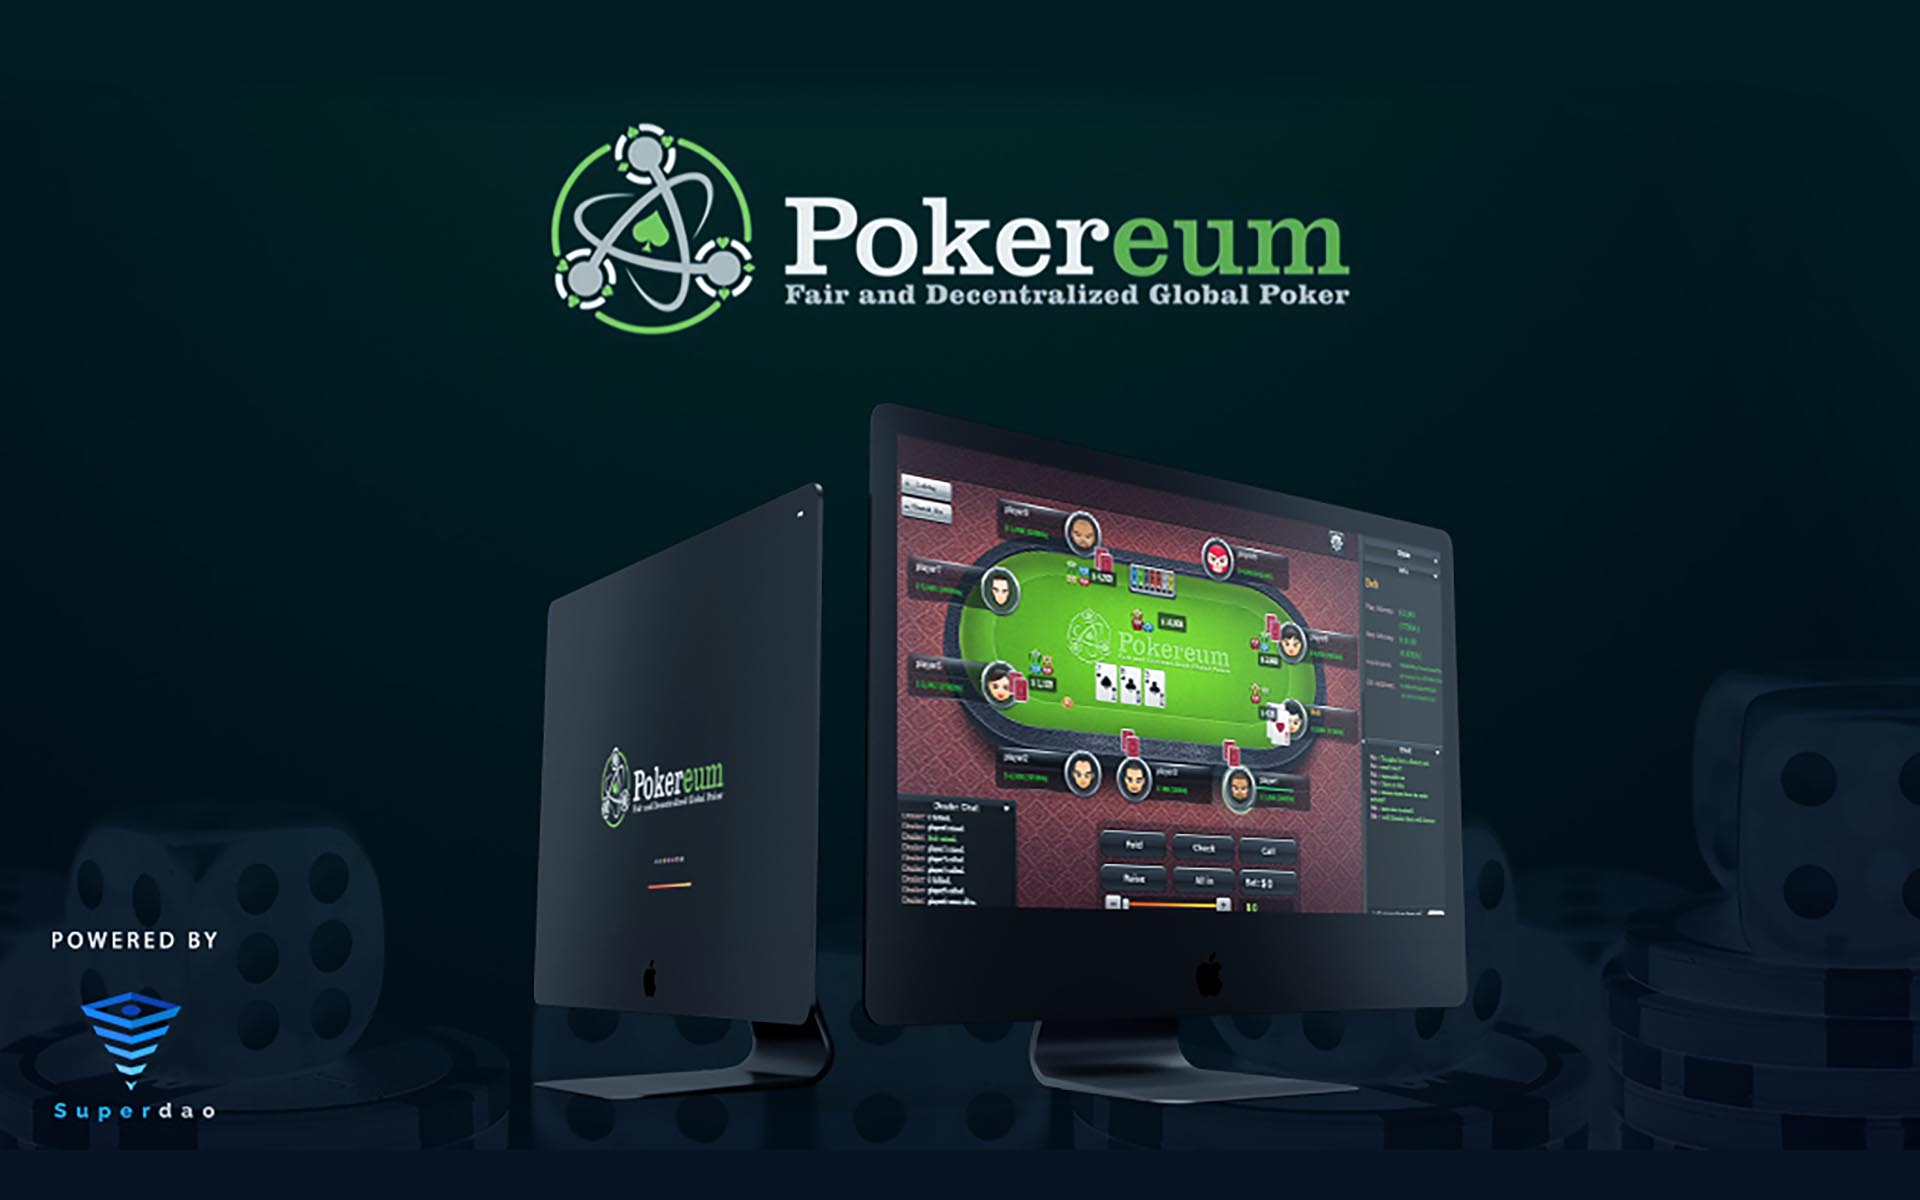 Ethereum Poker 'Pokereum' Demo Released by SuperDAO, Fundraising Now Pre-ICO Only with Bonus SUP Rewards